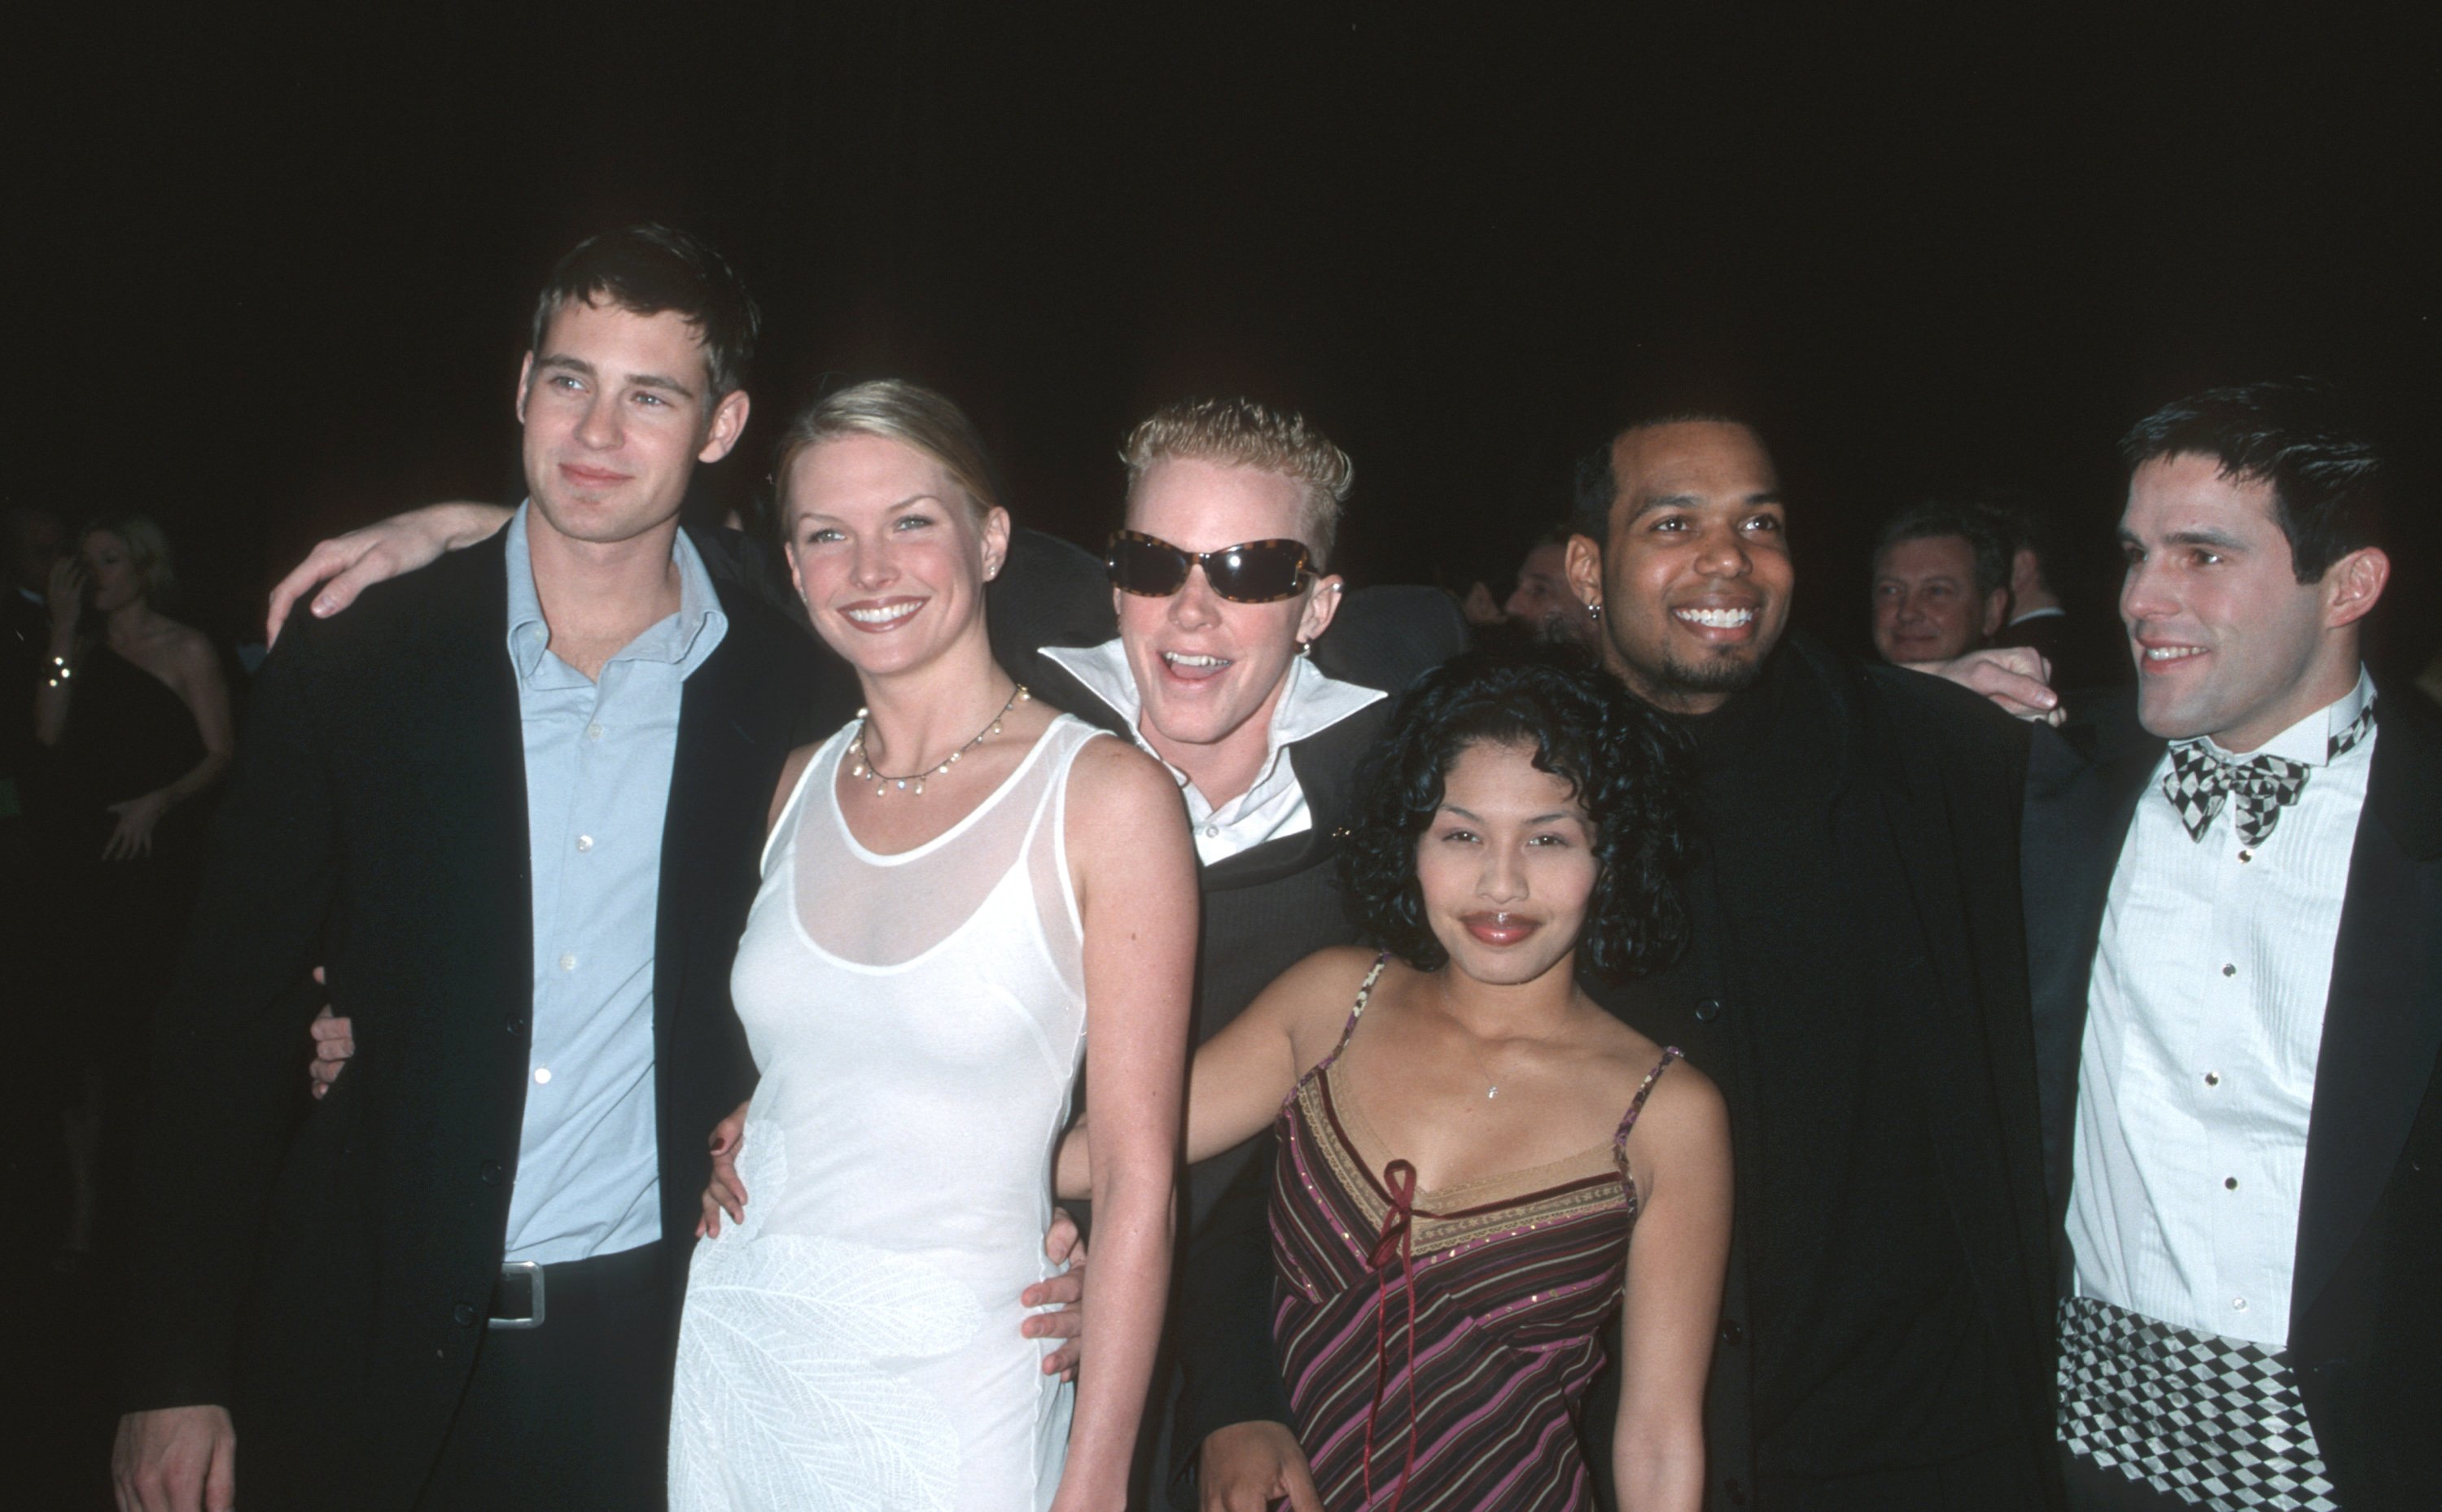 Members of 'The Real World: New Orleans' cast at the People's Choice Awards in 2001